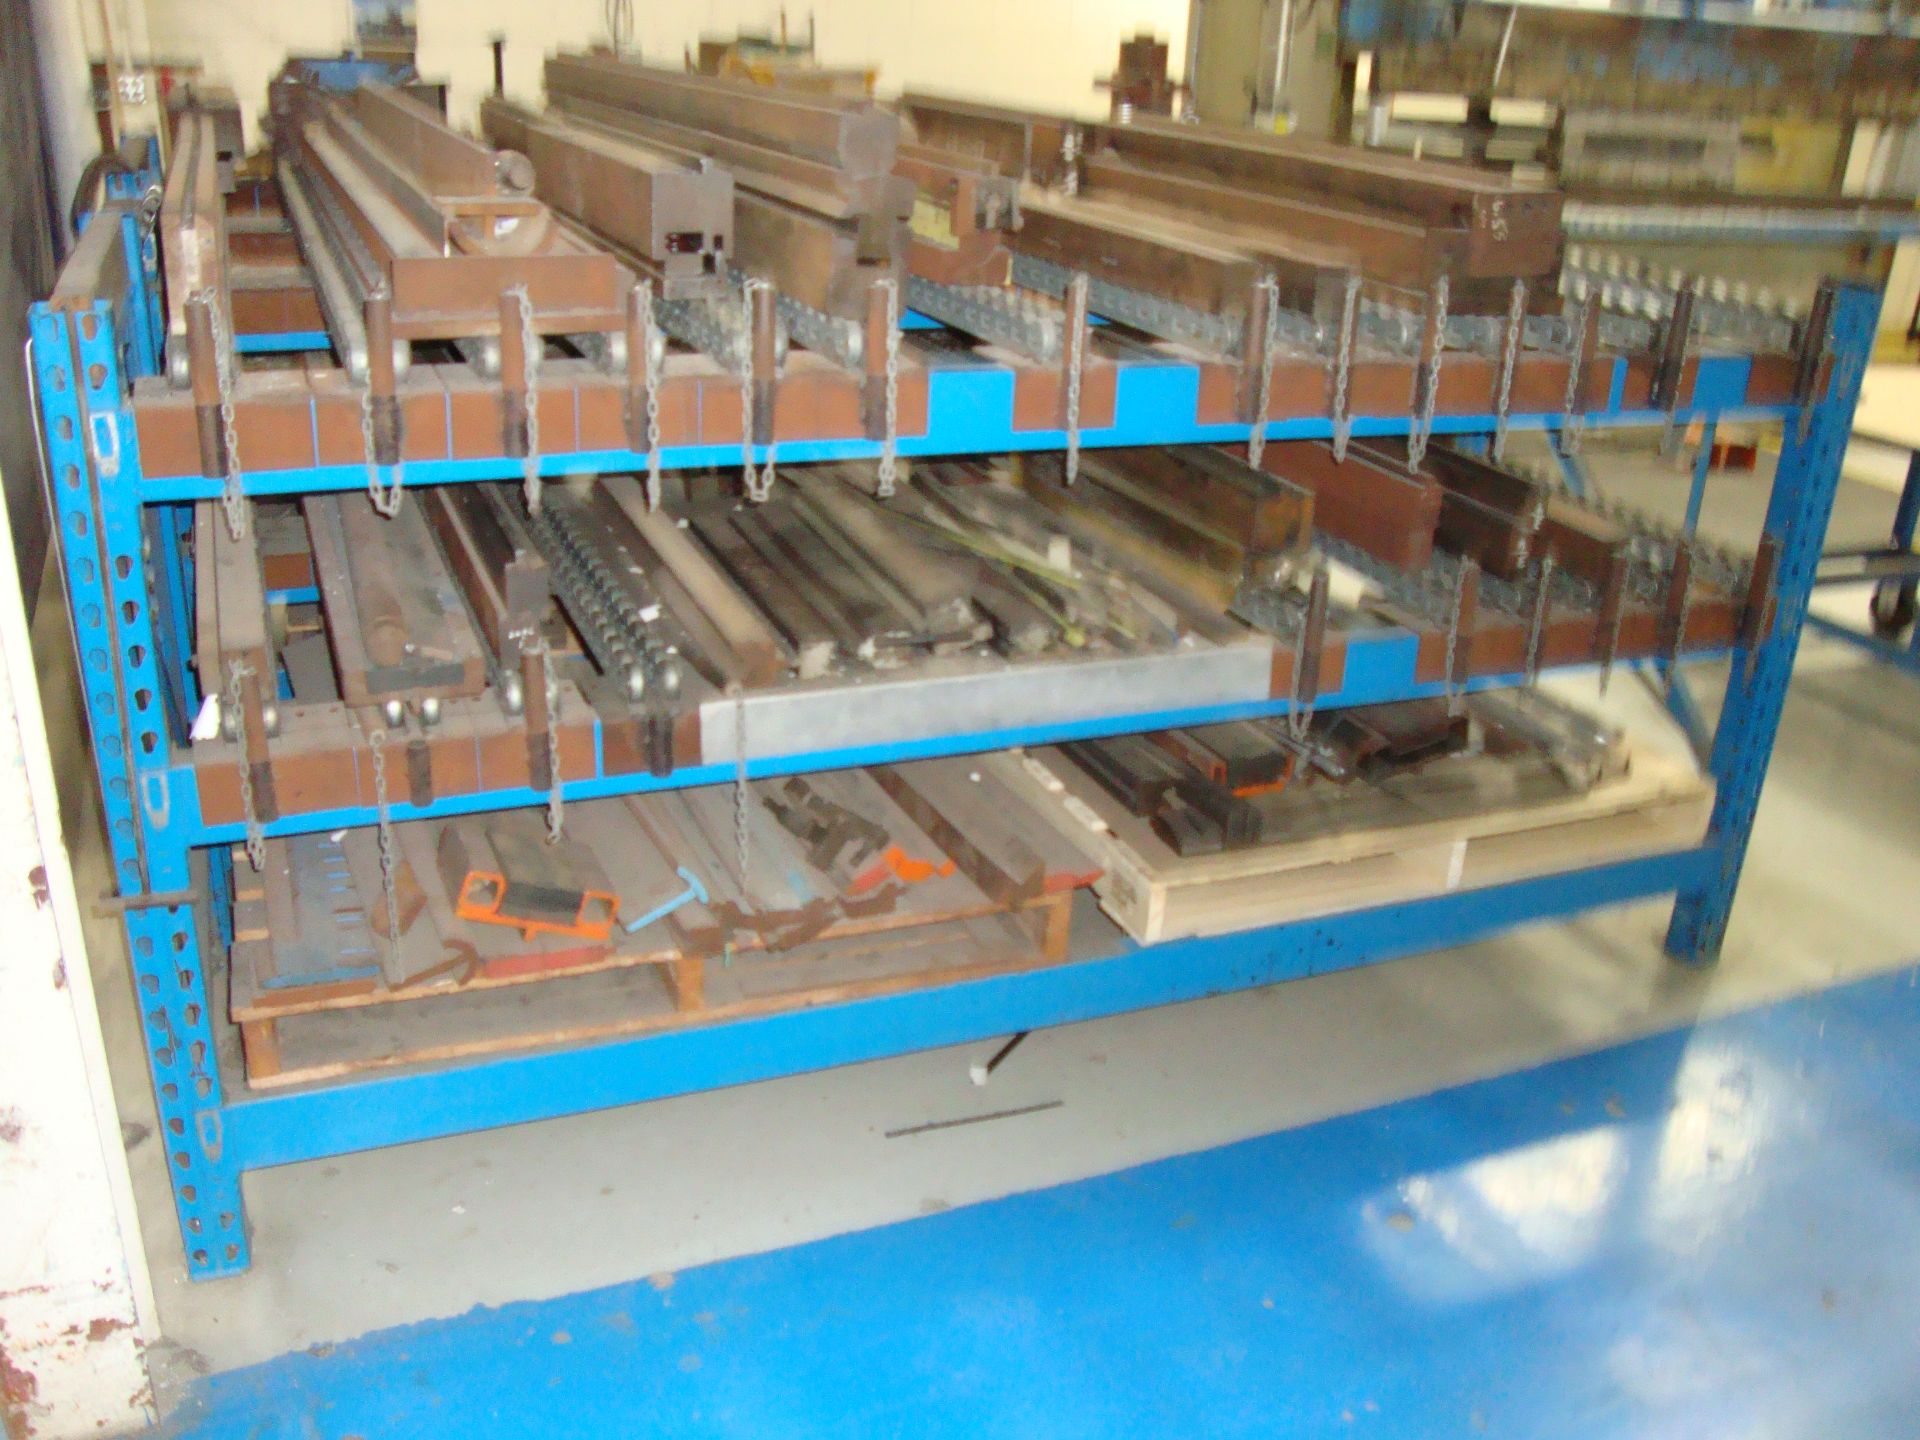 Press Brake Rolling Tooling Rack ONLY, approx. 103" x 96" x 48" tall - Image 2 of 5